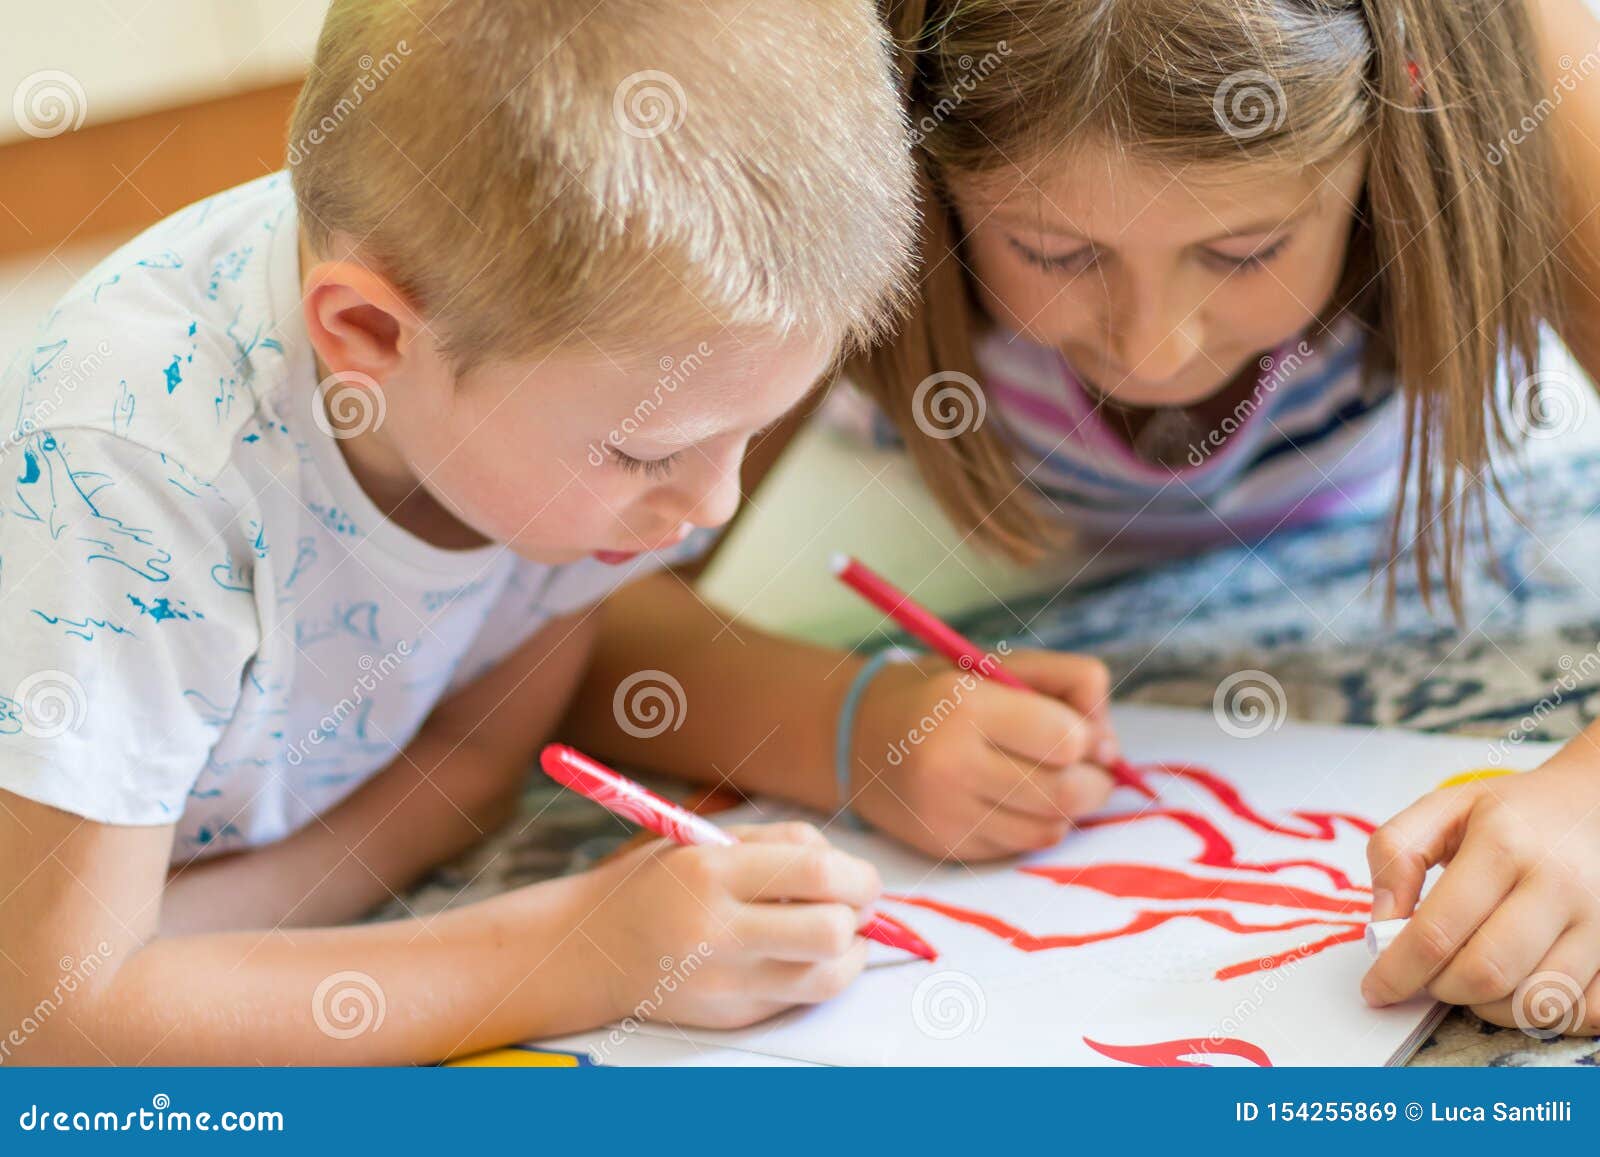 3 566 Boy Girl Pencil Drawing Photos Free Royalty Free Stock Photos From Dreamstime